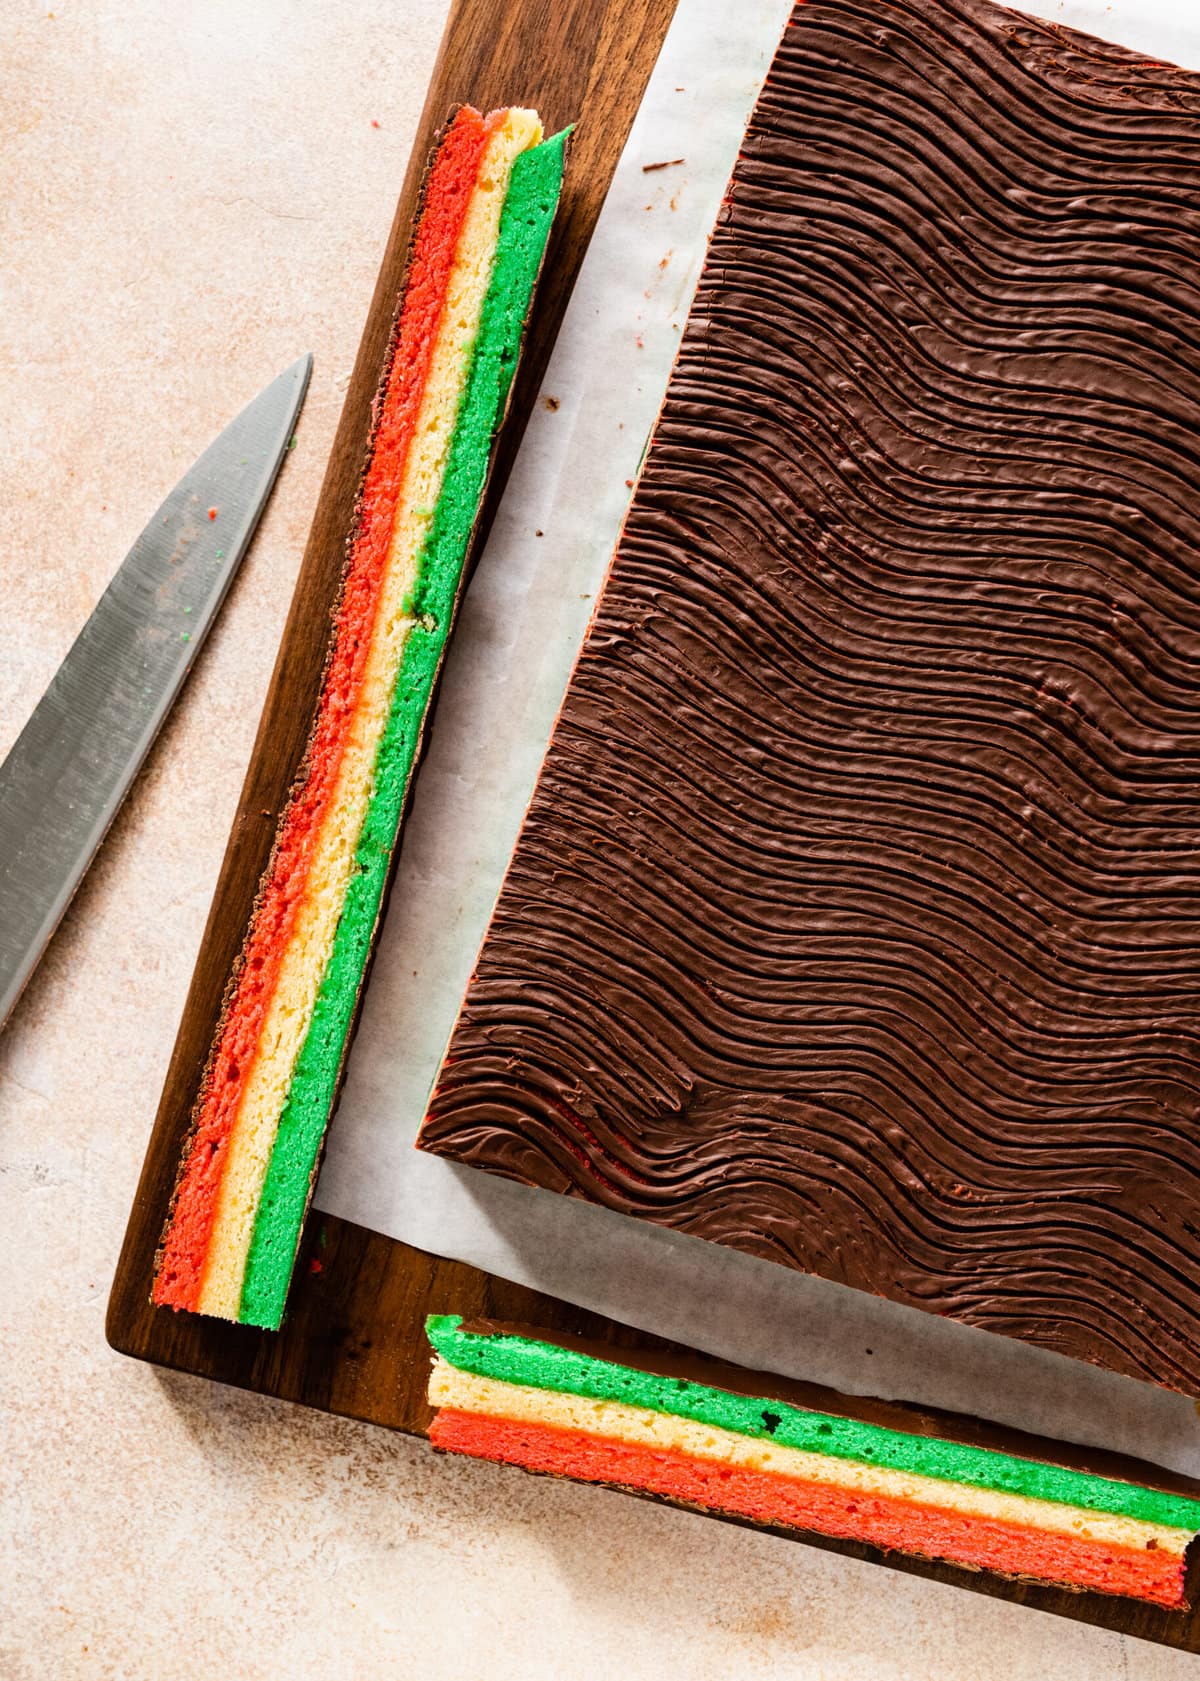 How to make Calssic Italian Rainbow Cookies Step-by-Step Instructions: making a swirl pattern on top of the top of cake layer with a fork. Cutting off the edges for a clean cut.